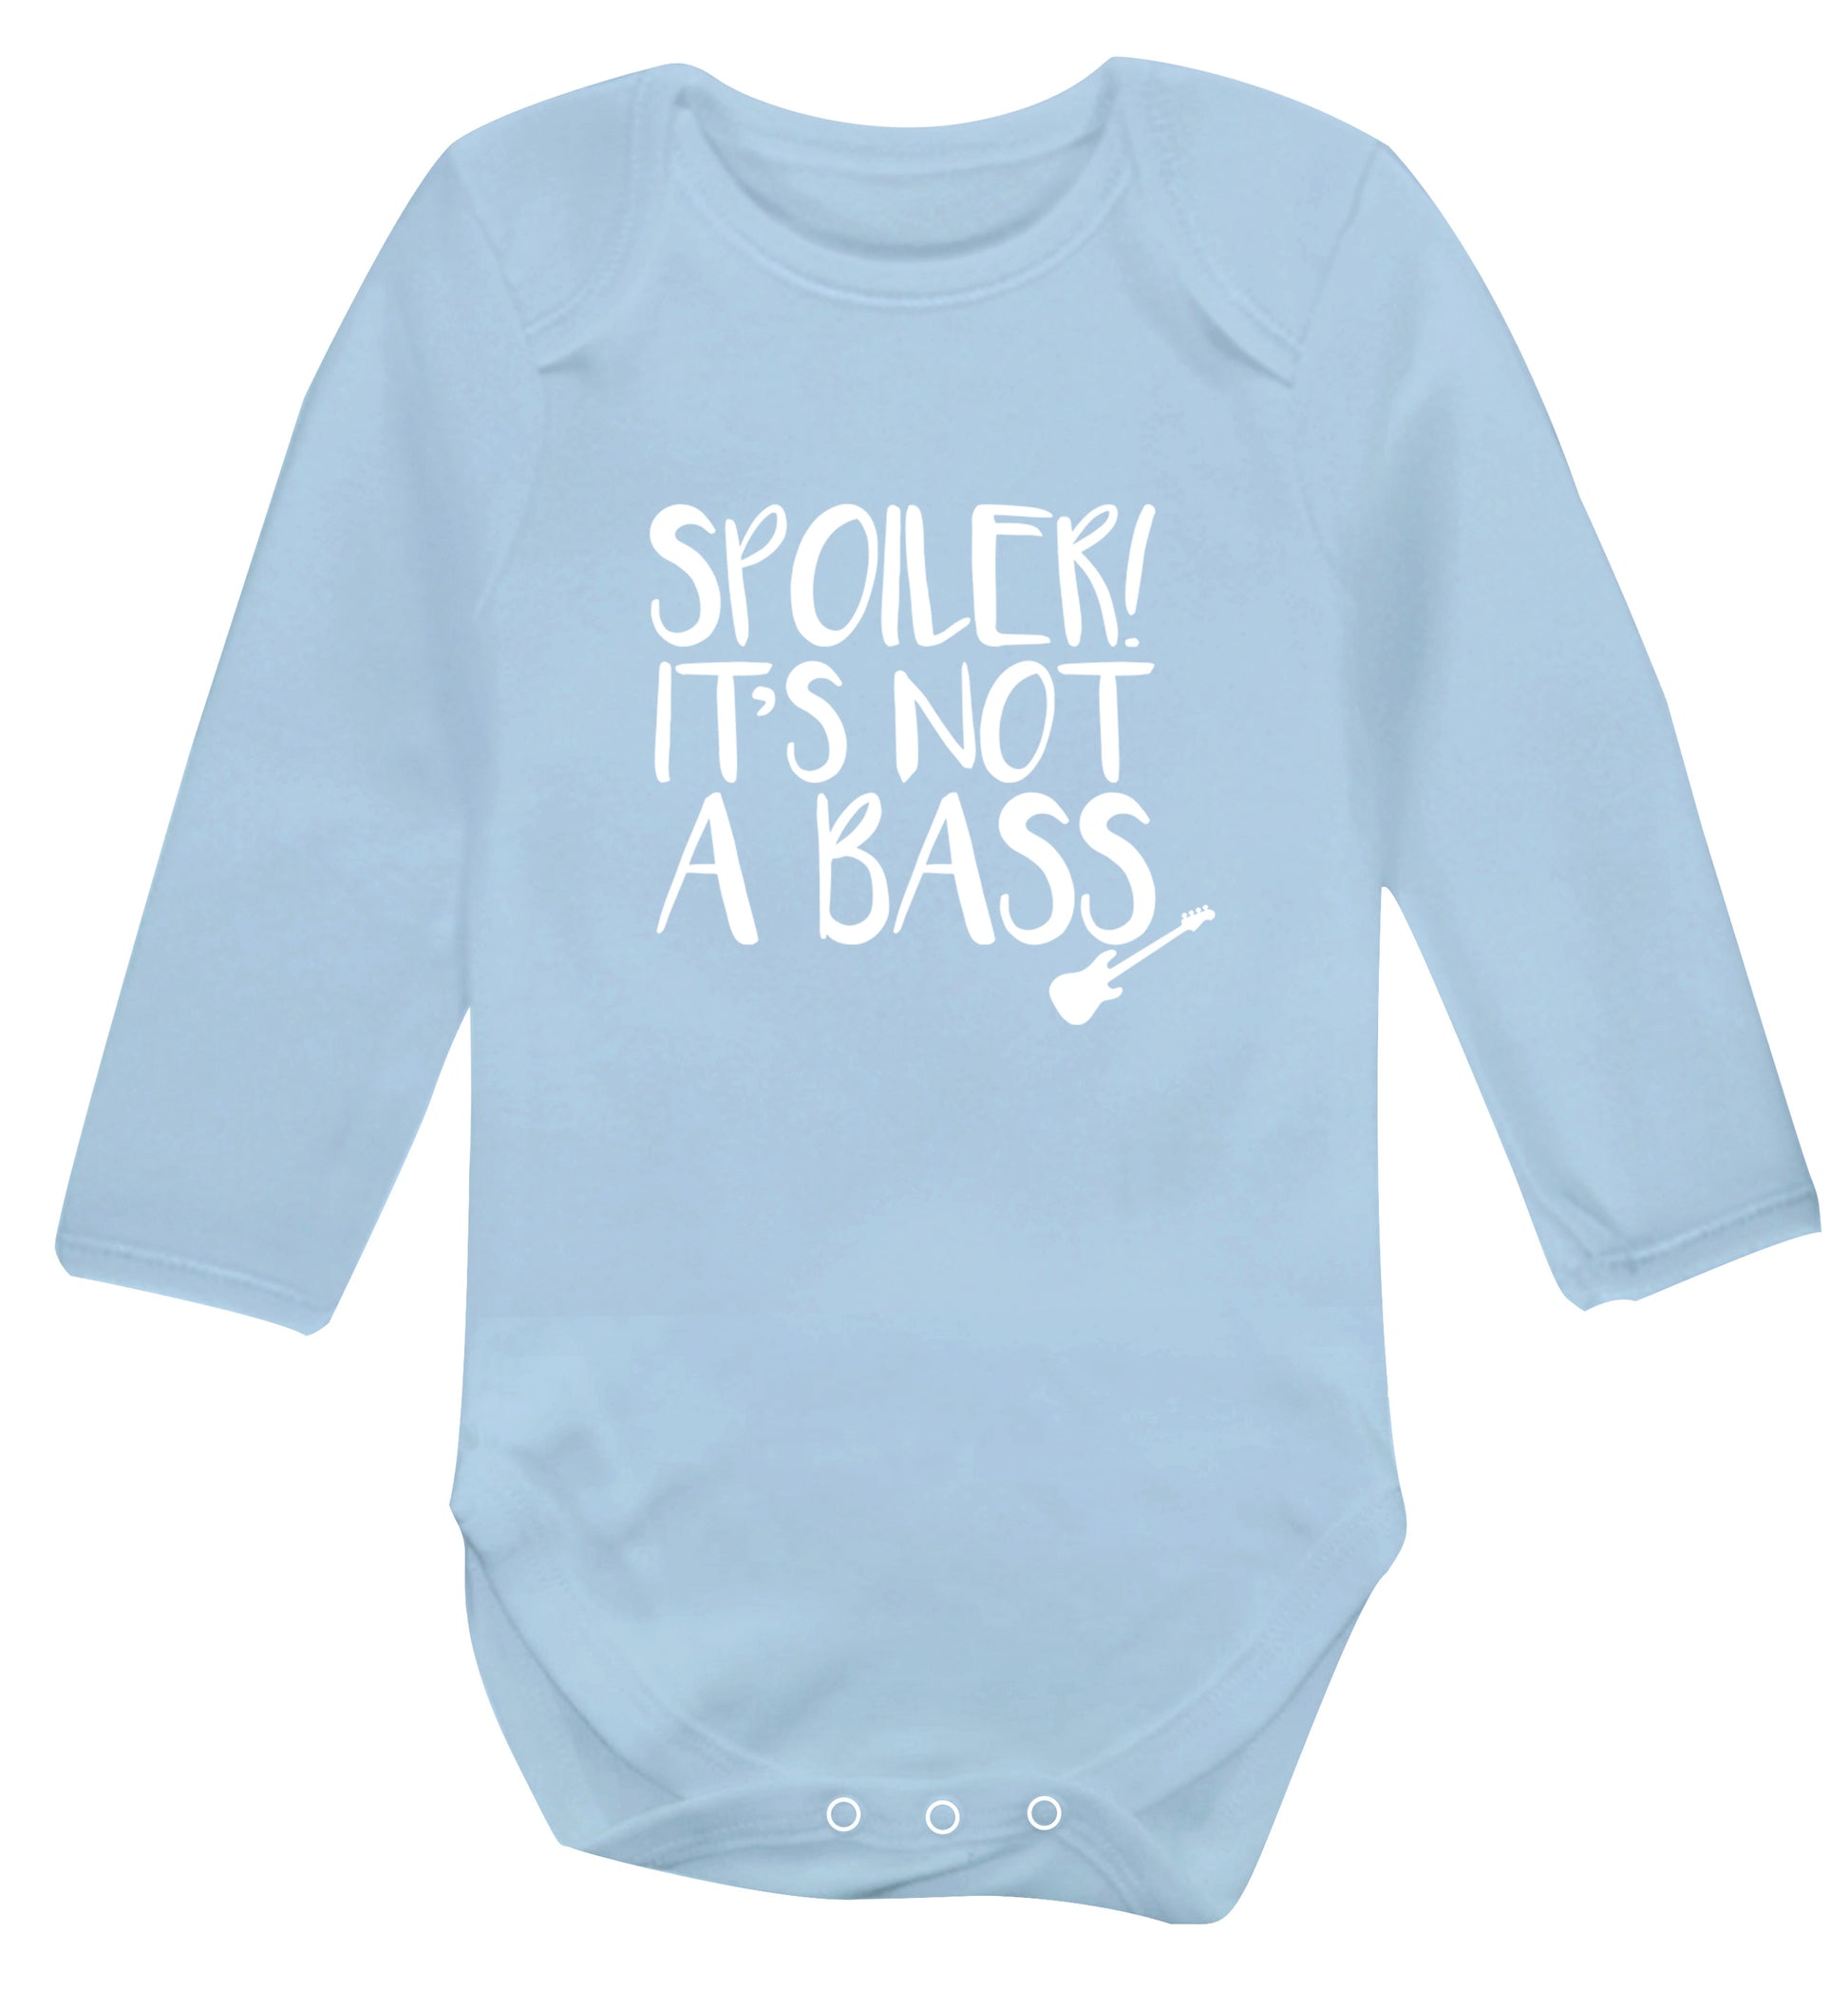 Spoiler it's not a bass Baby Vest long sleeved pale blue 6-12 months